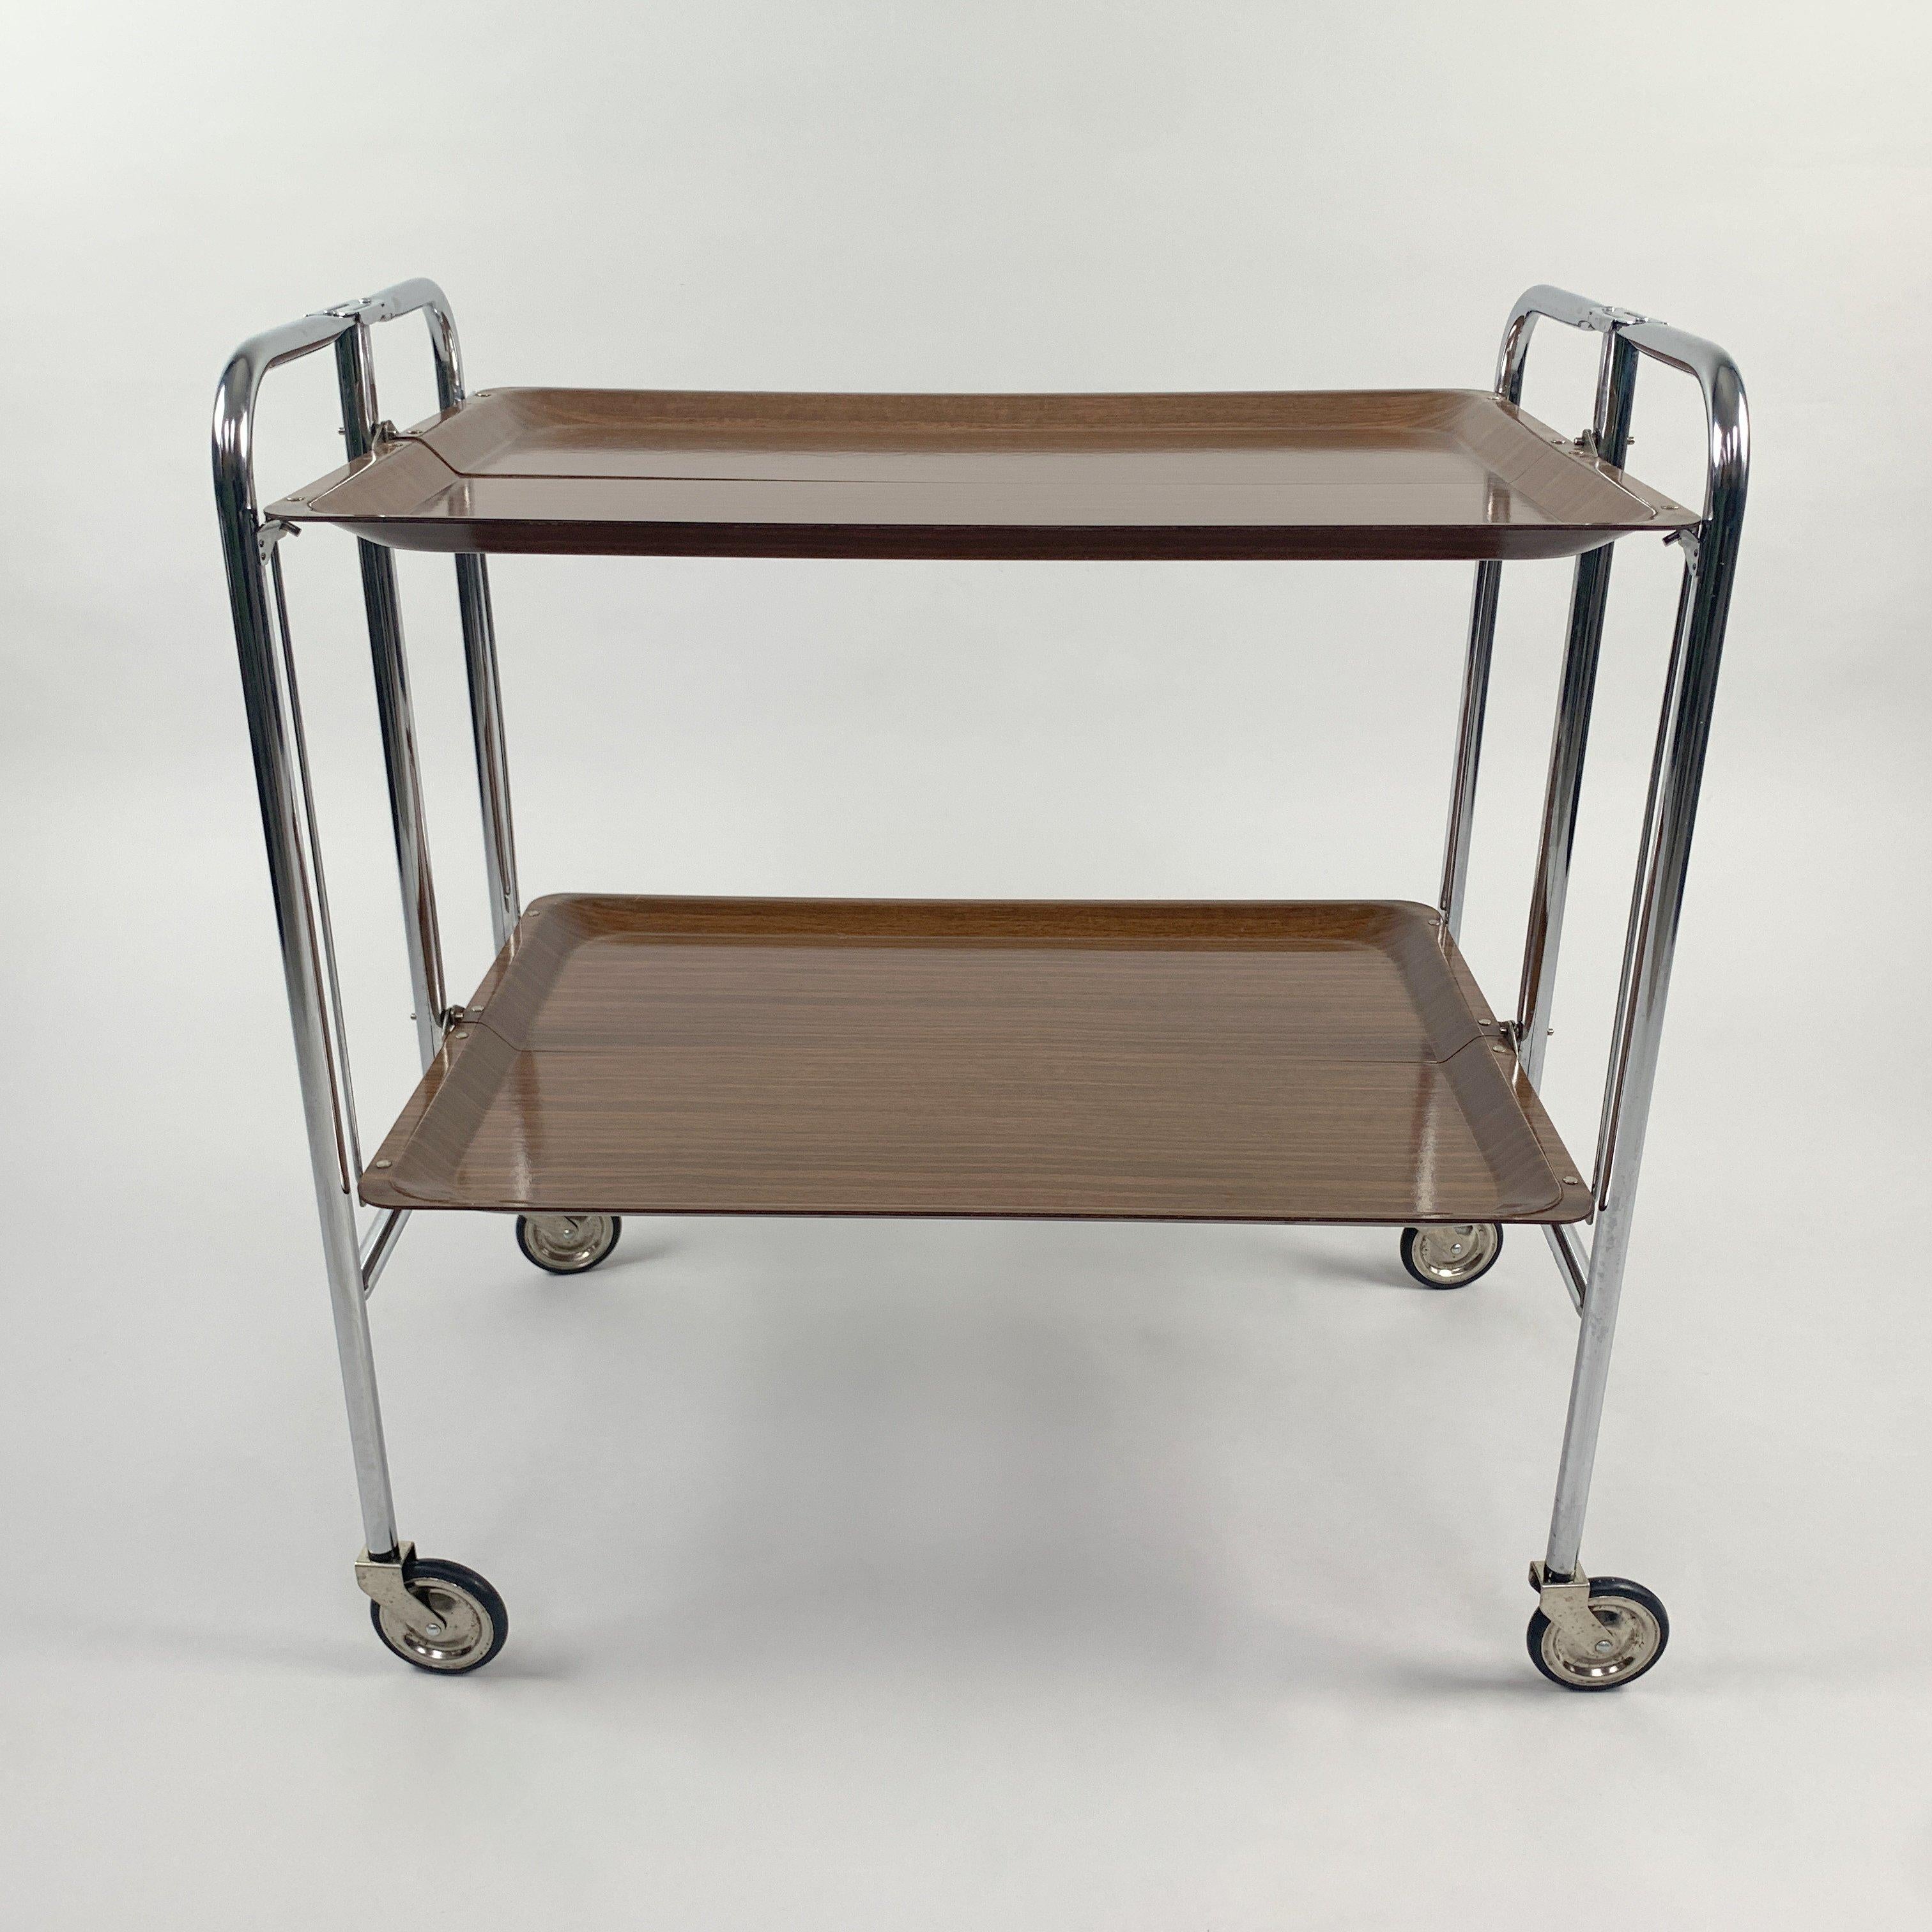 Mid-Century Modern, vintage serving tea cart consisting of laminated wood and chrome. Produced in Germany in the 1950s. Very good vintage condition.